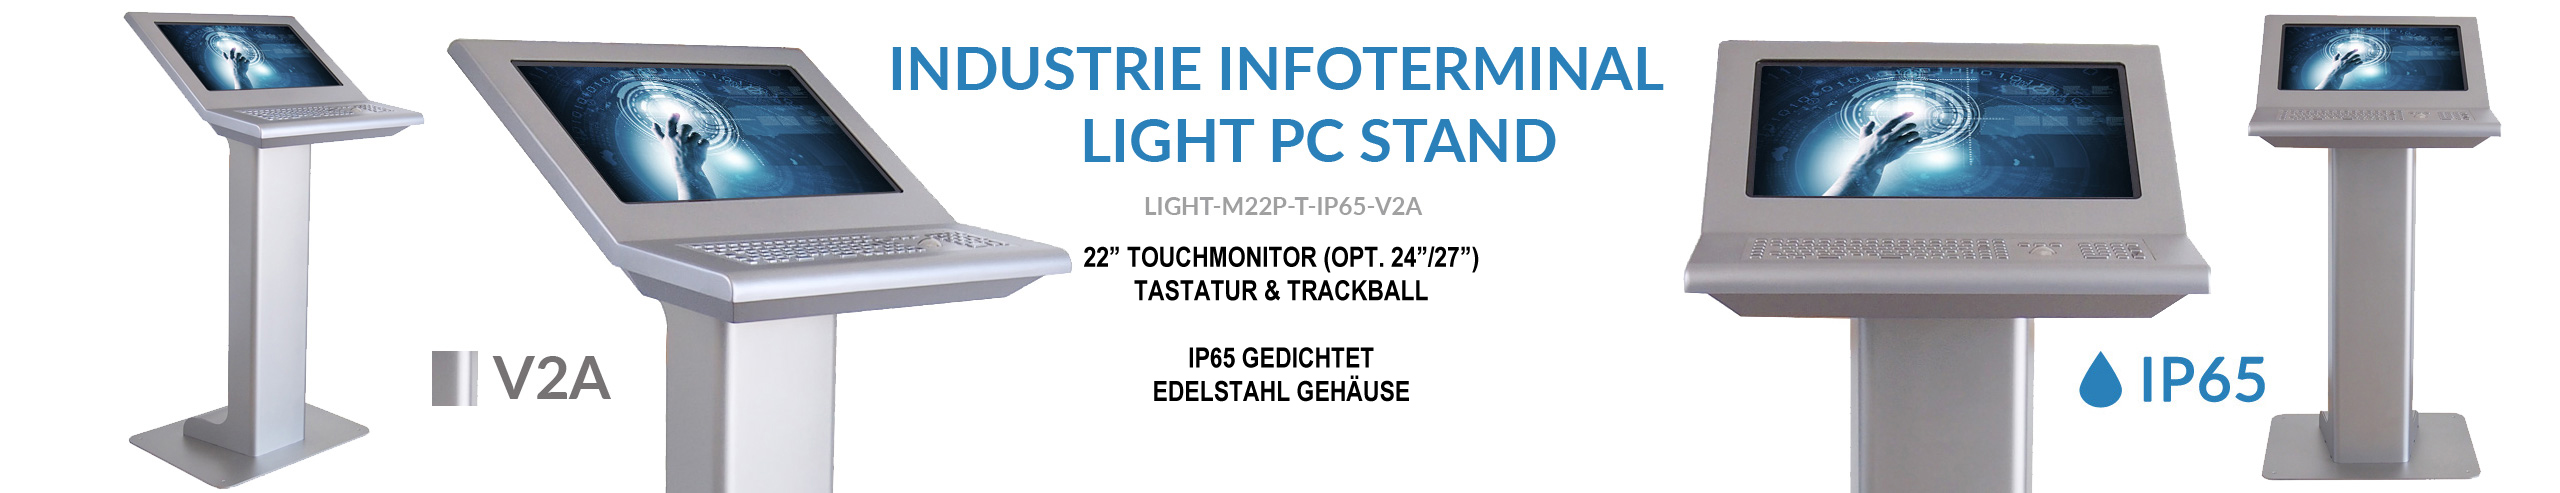 Light Pc Stand Infoterminal Industrie 22 Zoll Touchmonitor Kapazitivem PCAP Touch Banner